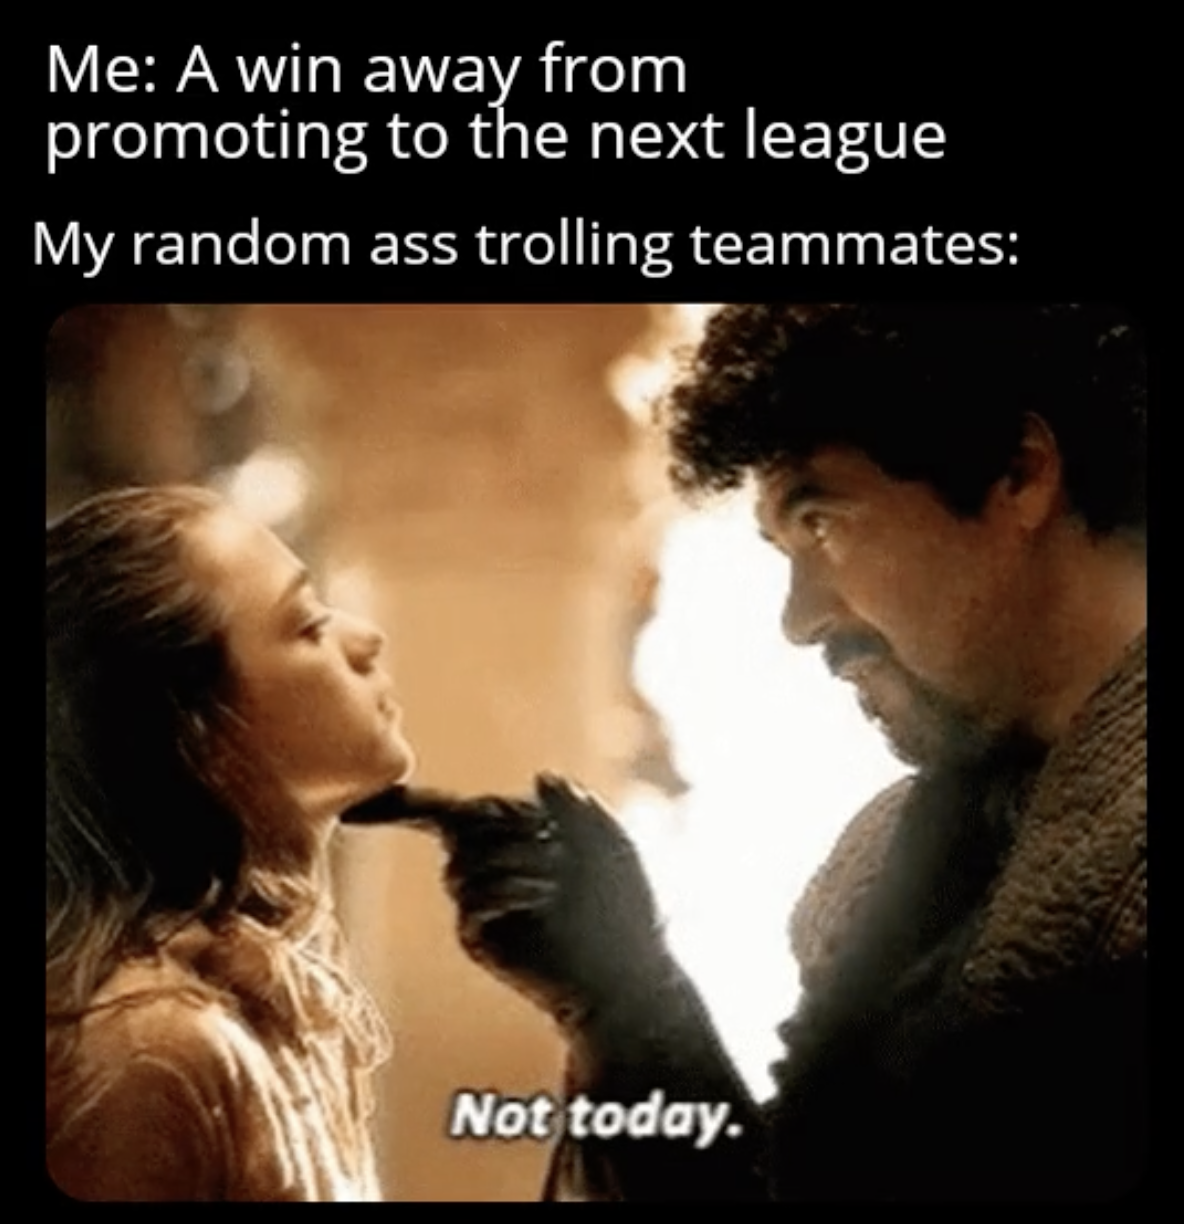 Gaming memes - Me A win away from promoting to the next league My random ass trolling teammates Not today.